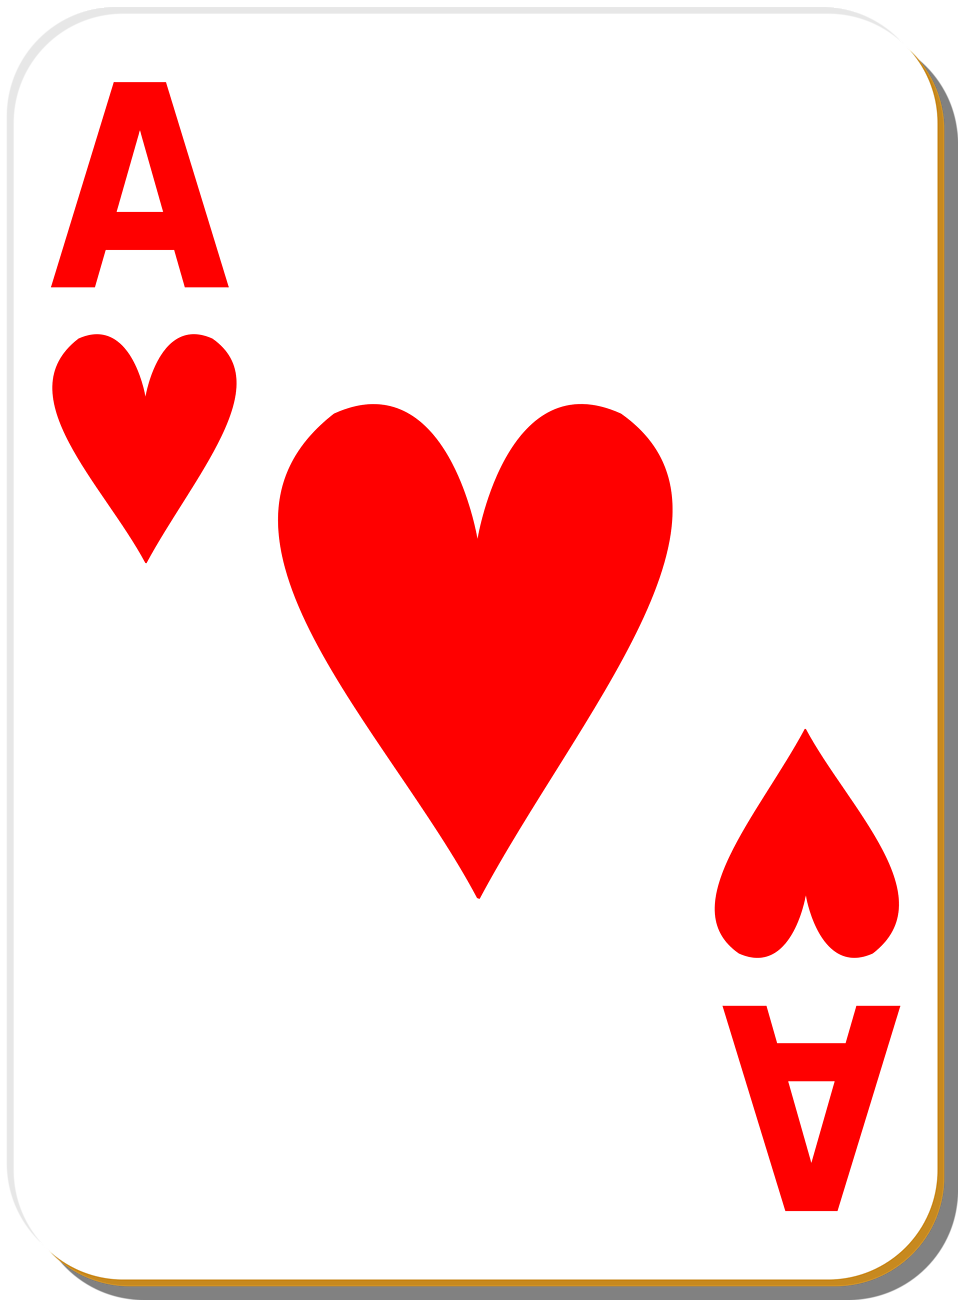 clip art pictures of playing cards - photo #24